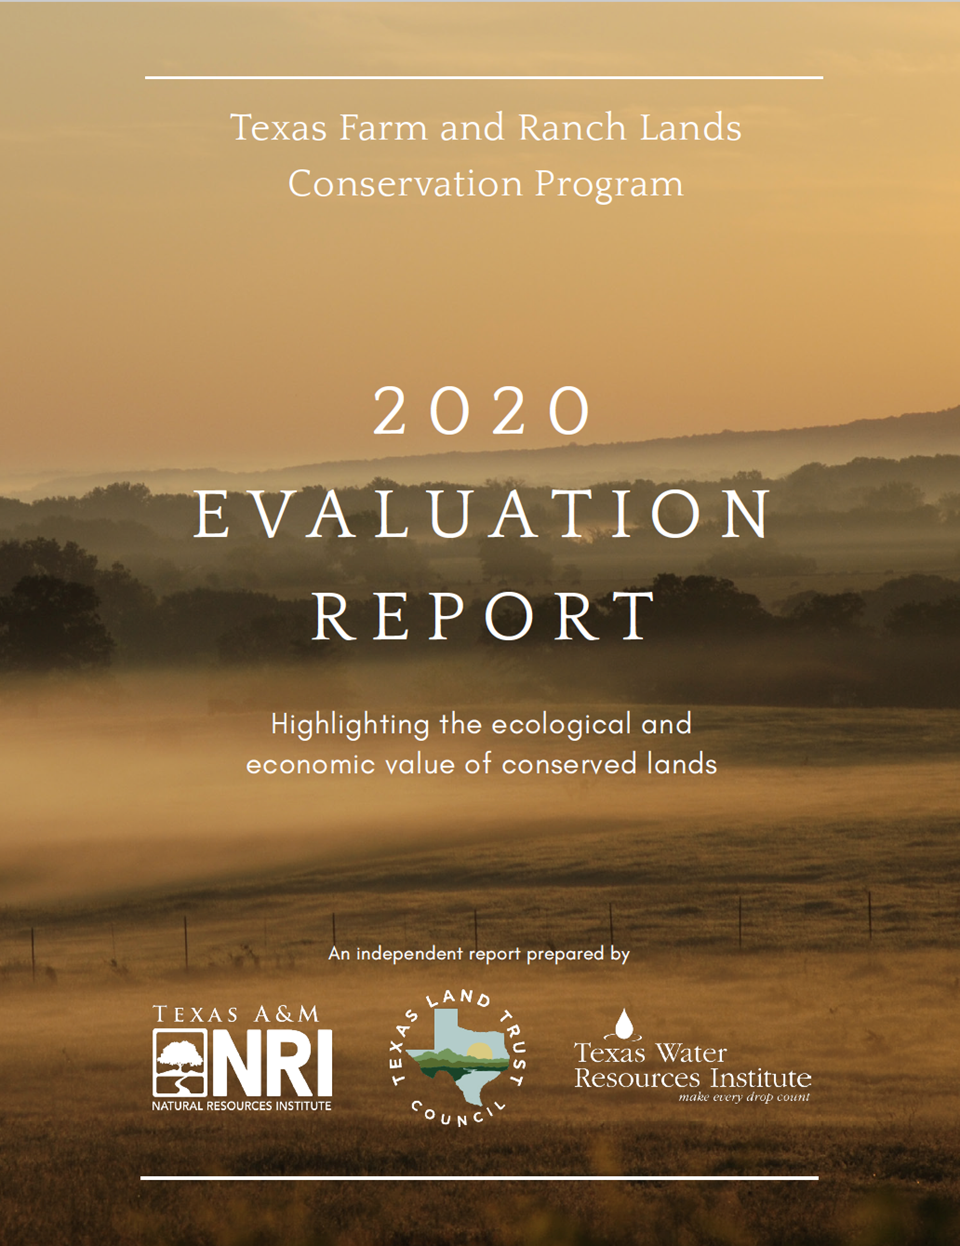 Texas farm and ranch lands conservation program 2020 evaluation report